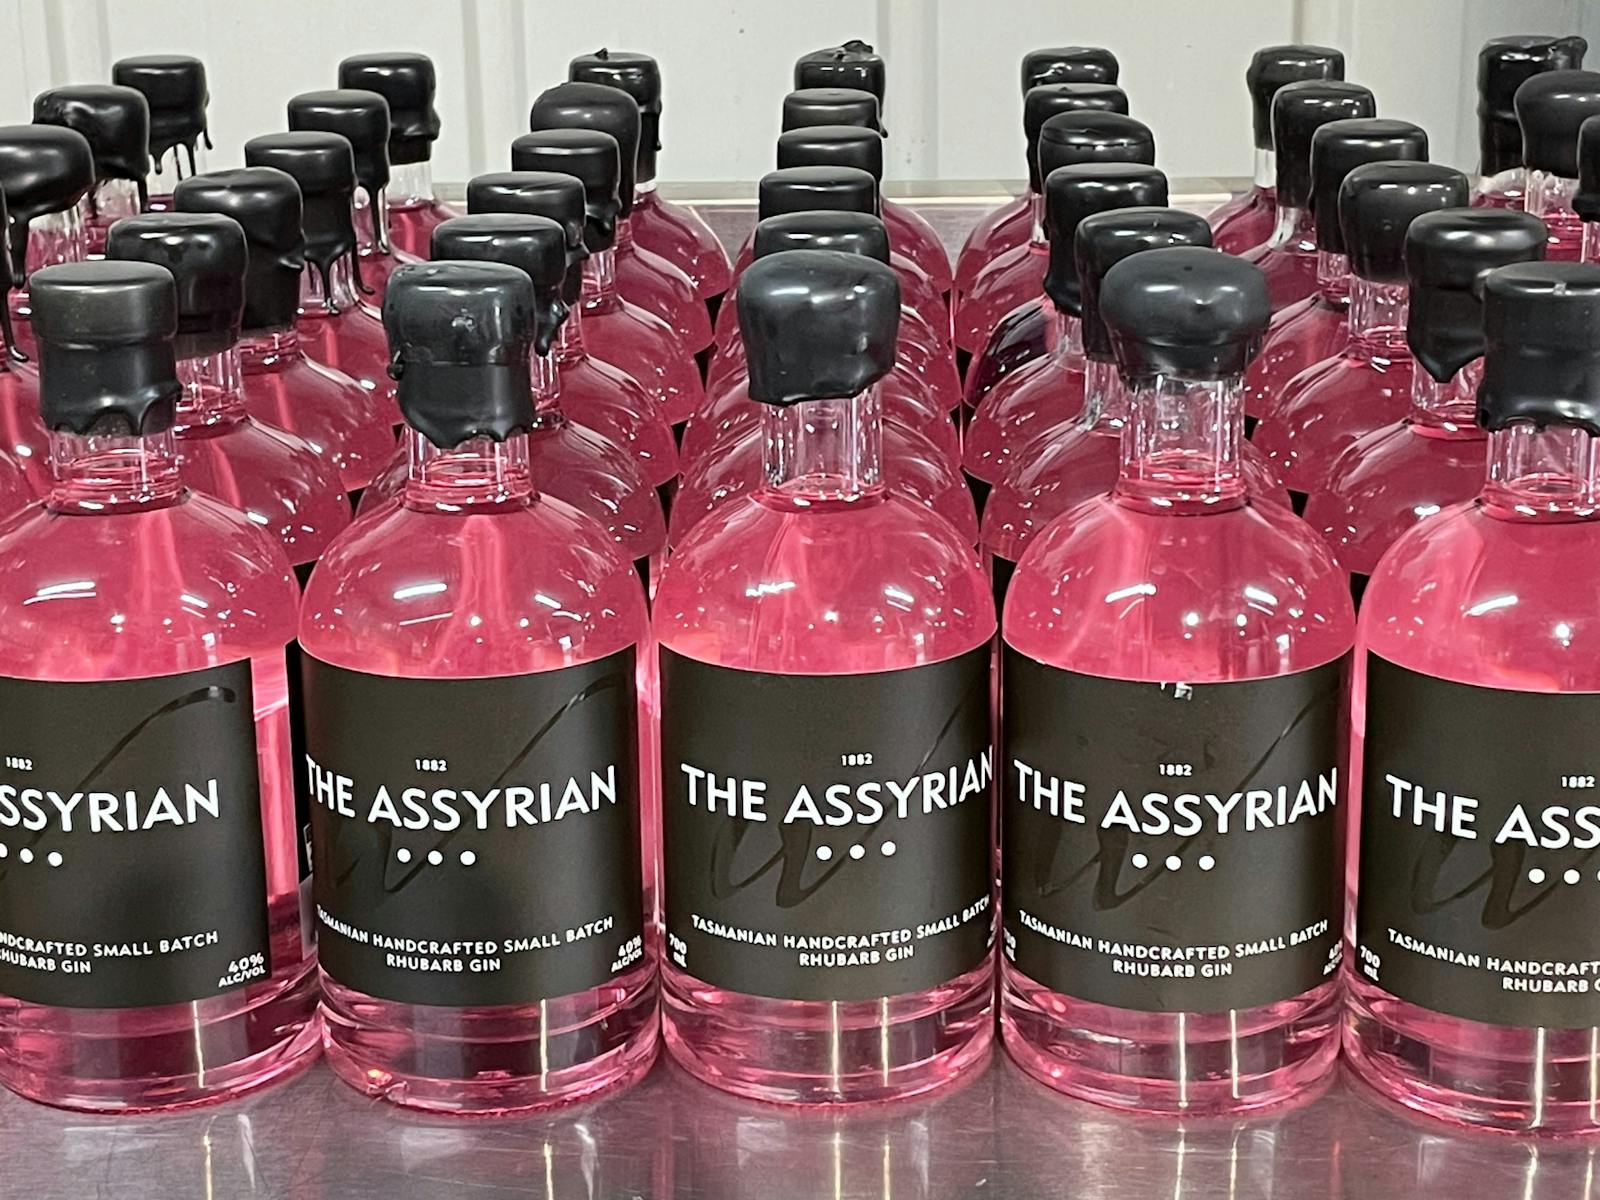 The Assyrian Rhubarb Gin ready for Packaging